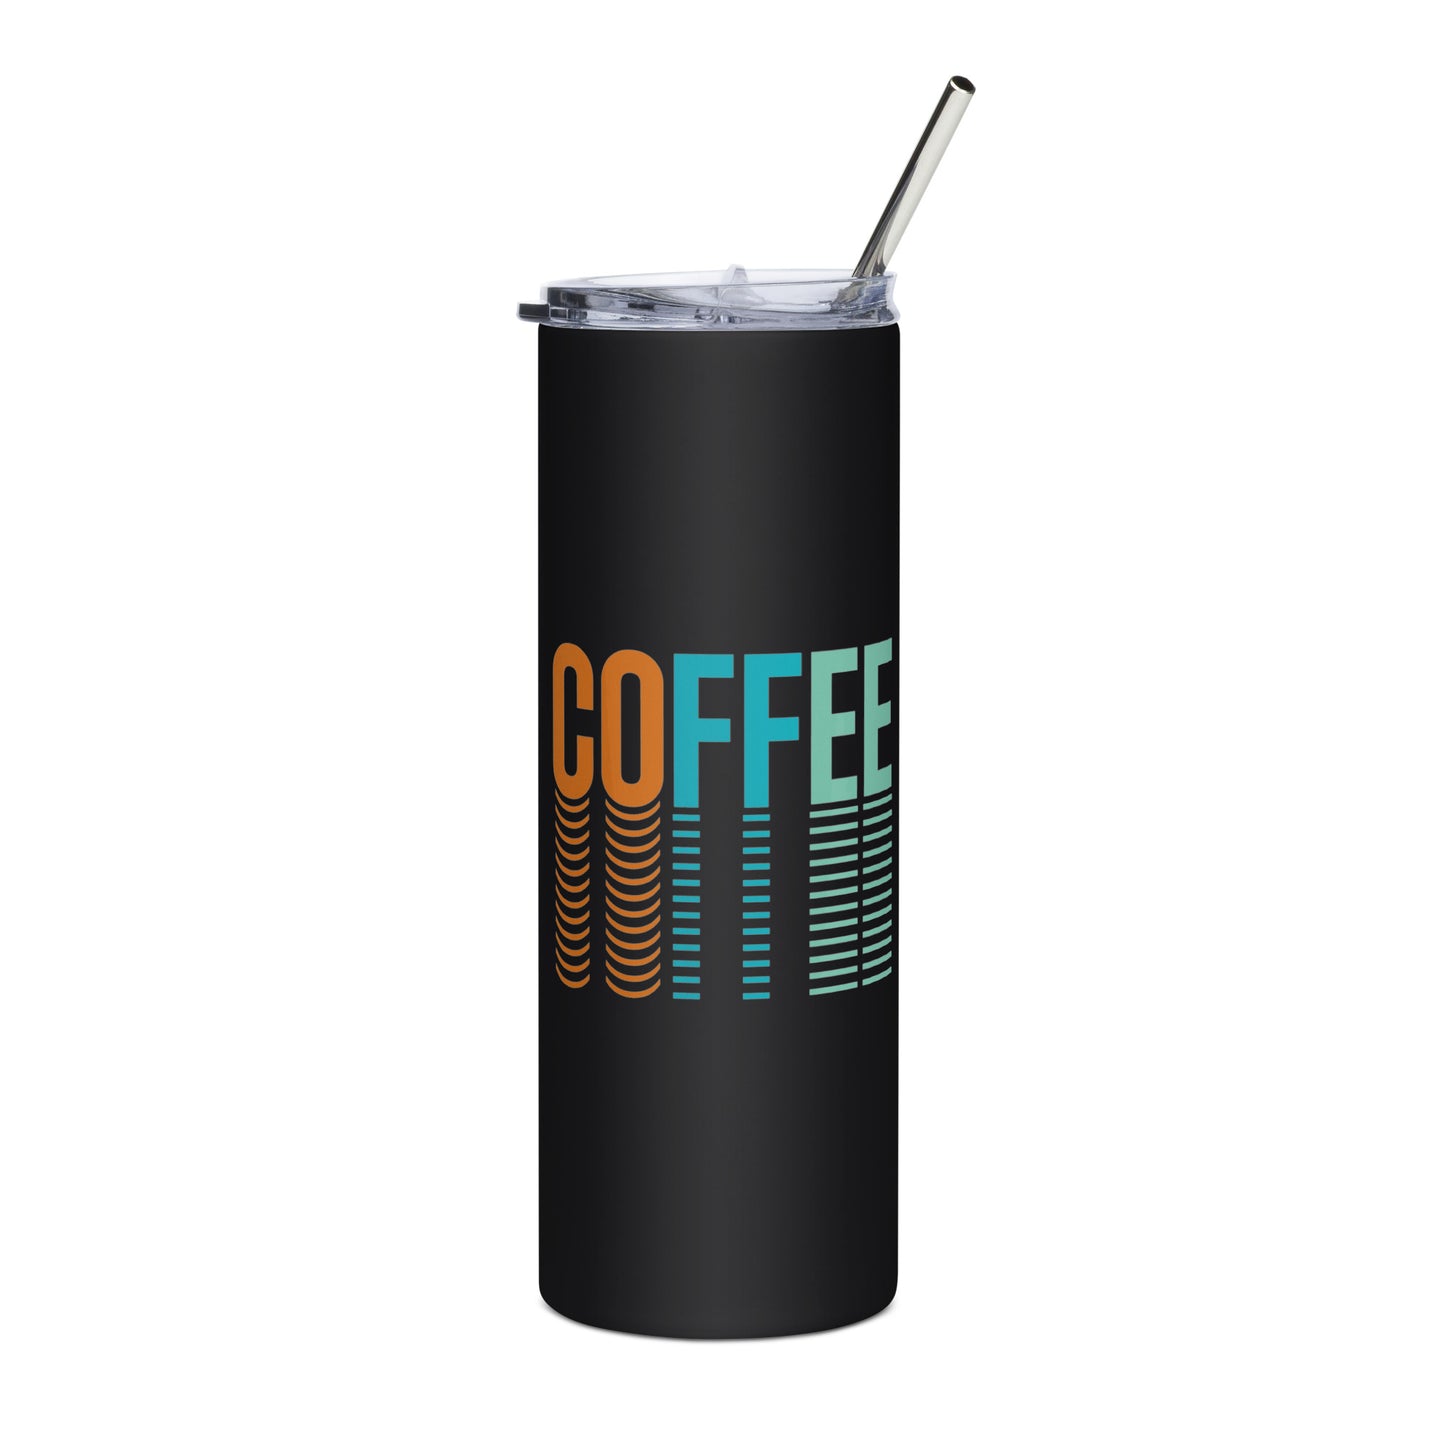 Coffee Stainless steel tumbler